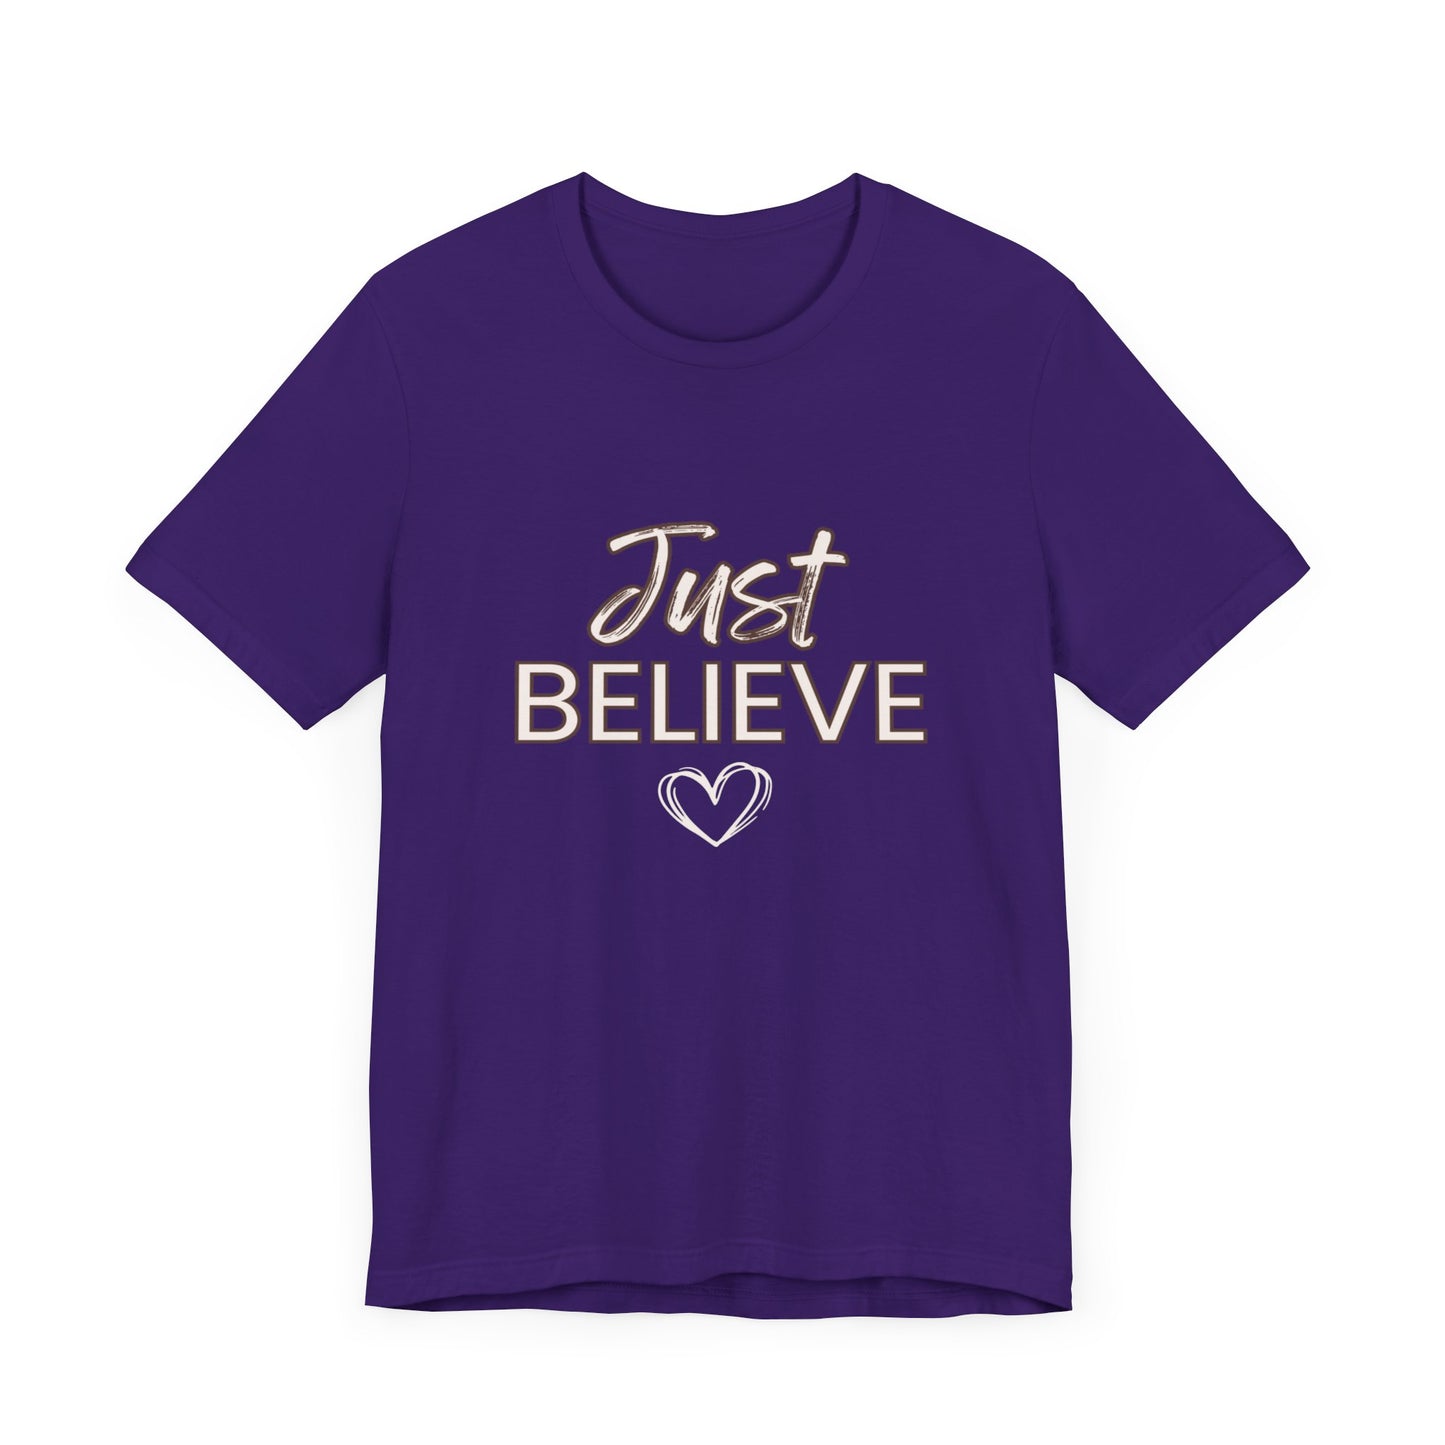 Bella+Canvas Unisex Jersey Short Sleeve Tee front- "Just Believe" back "Your Enough with Jesus"